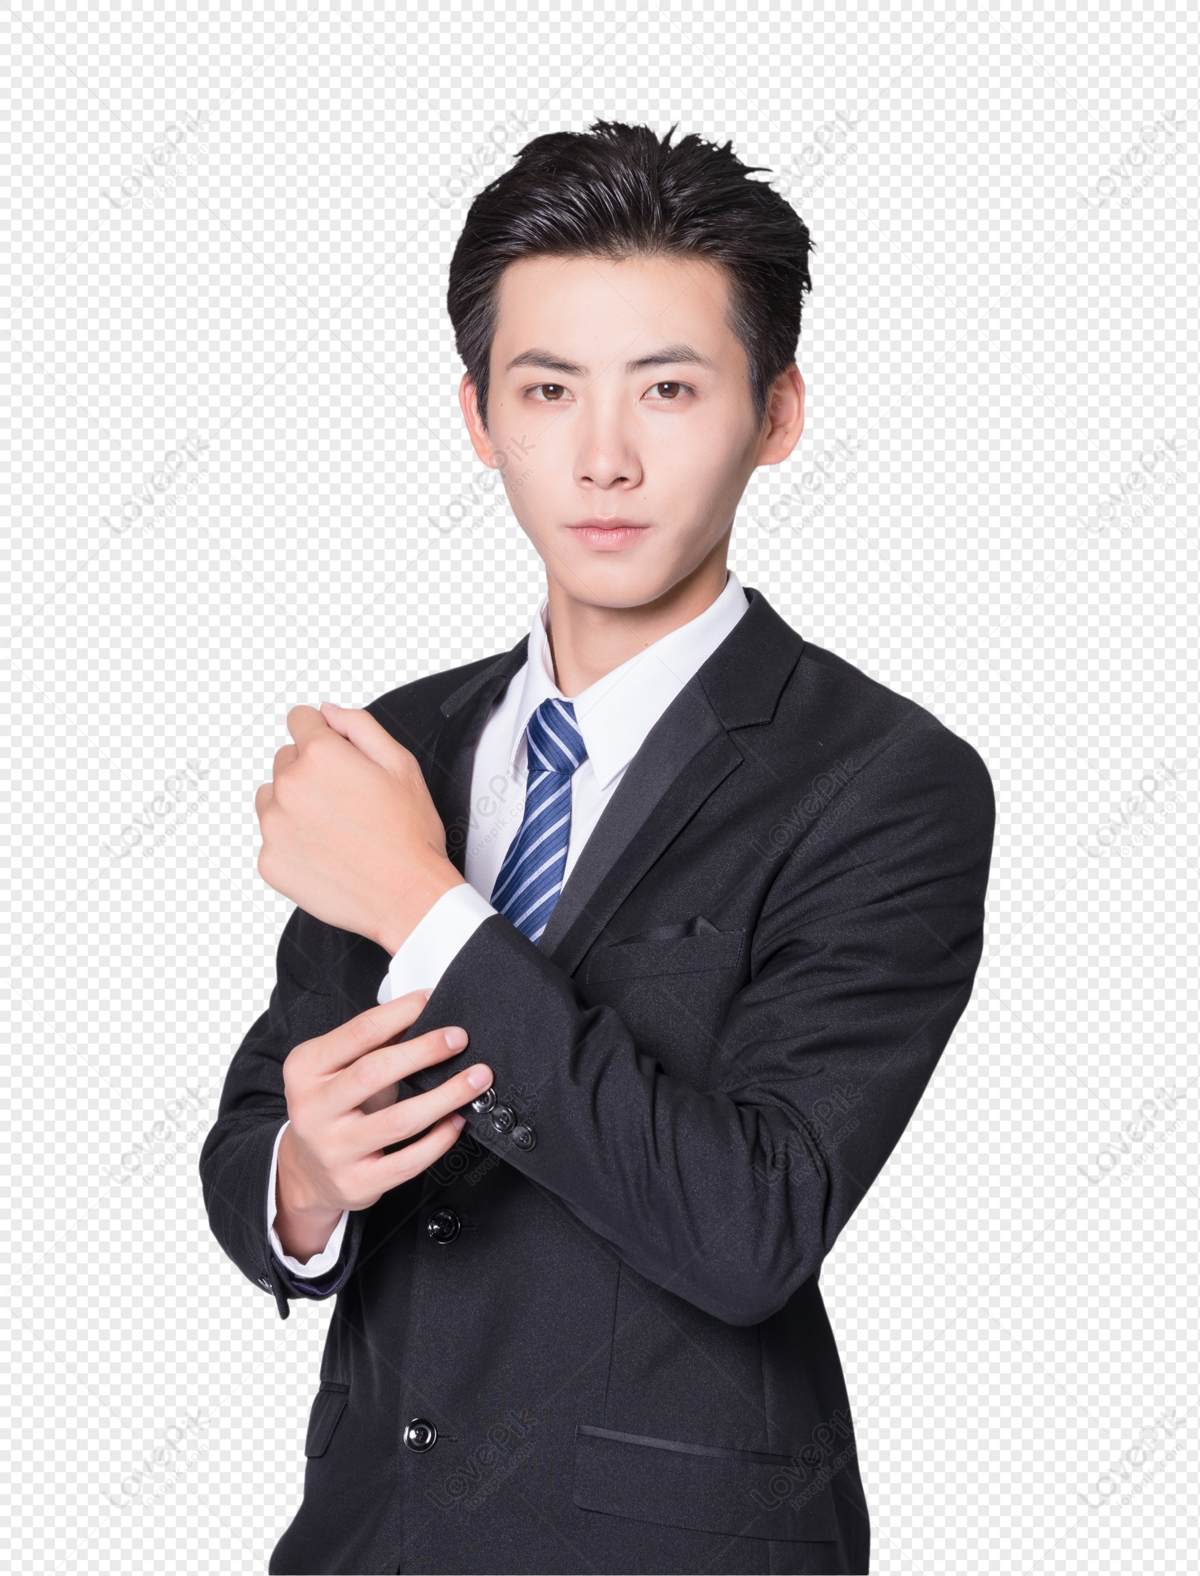 Business man finishing sleeves, business formal, business suit, chinese man png picture